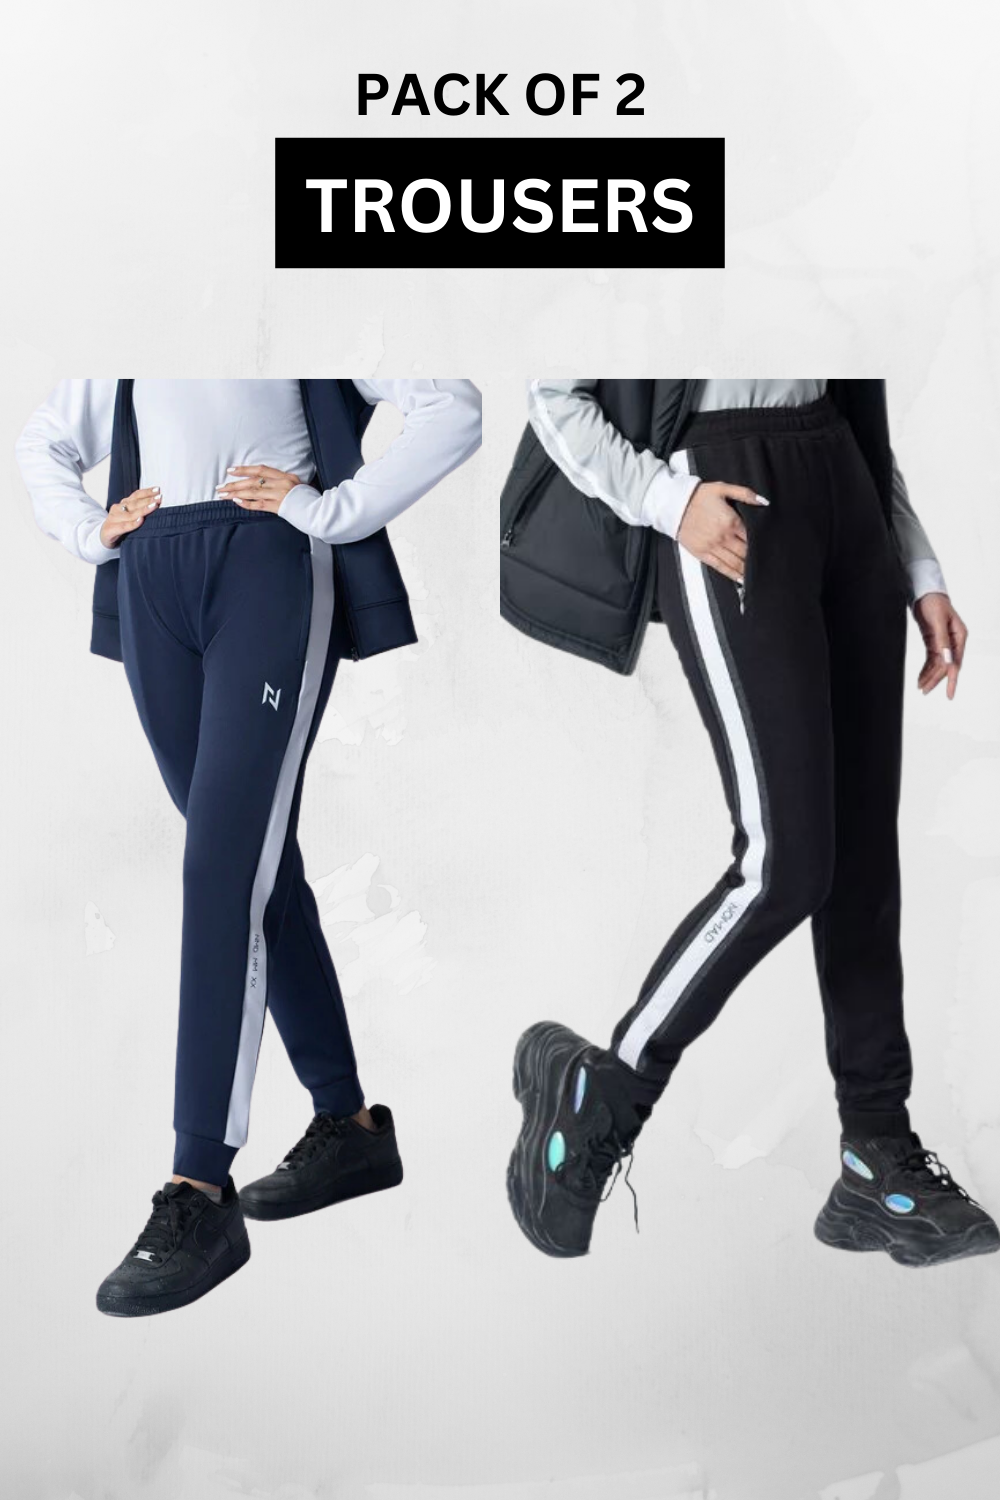 PACK OF 2 TROUSERS